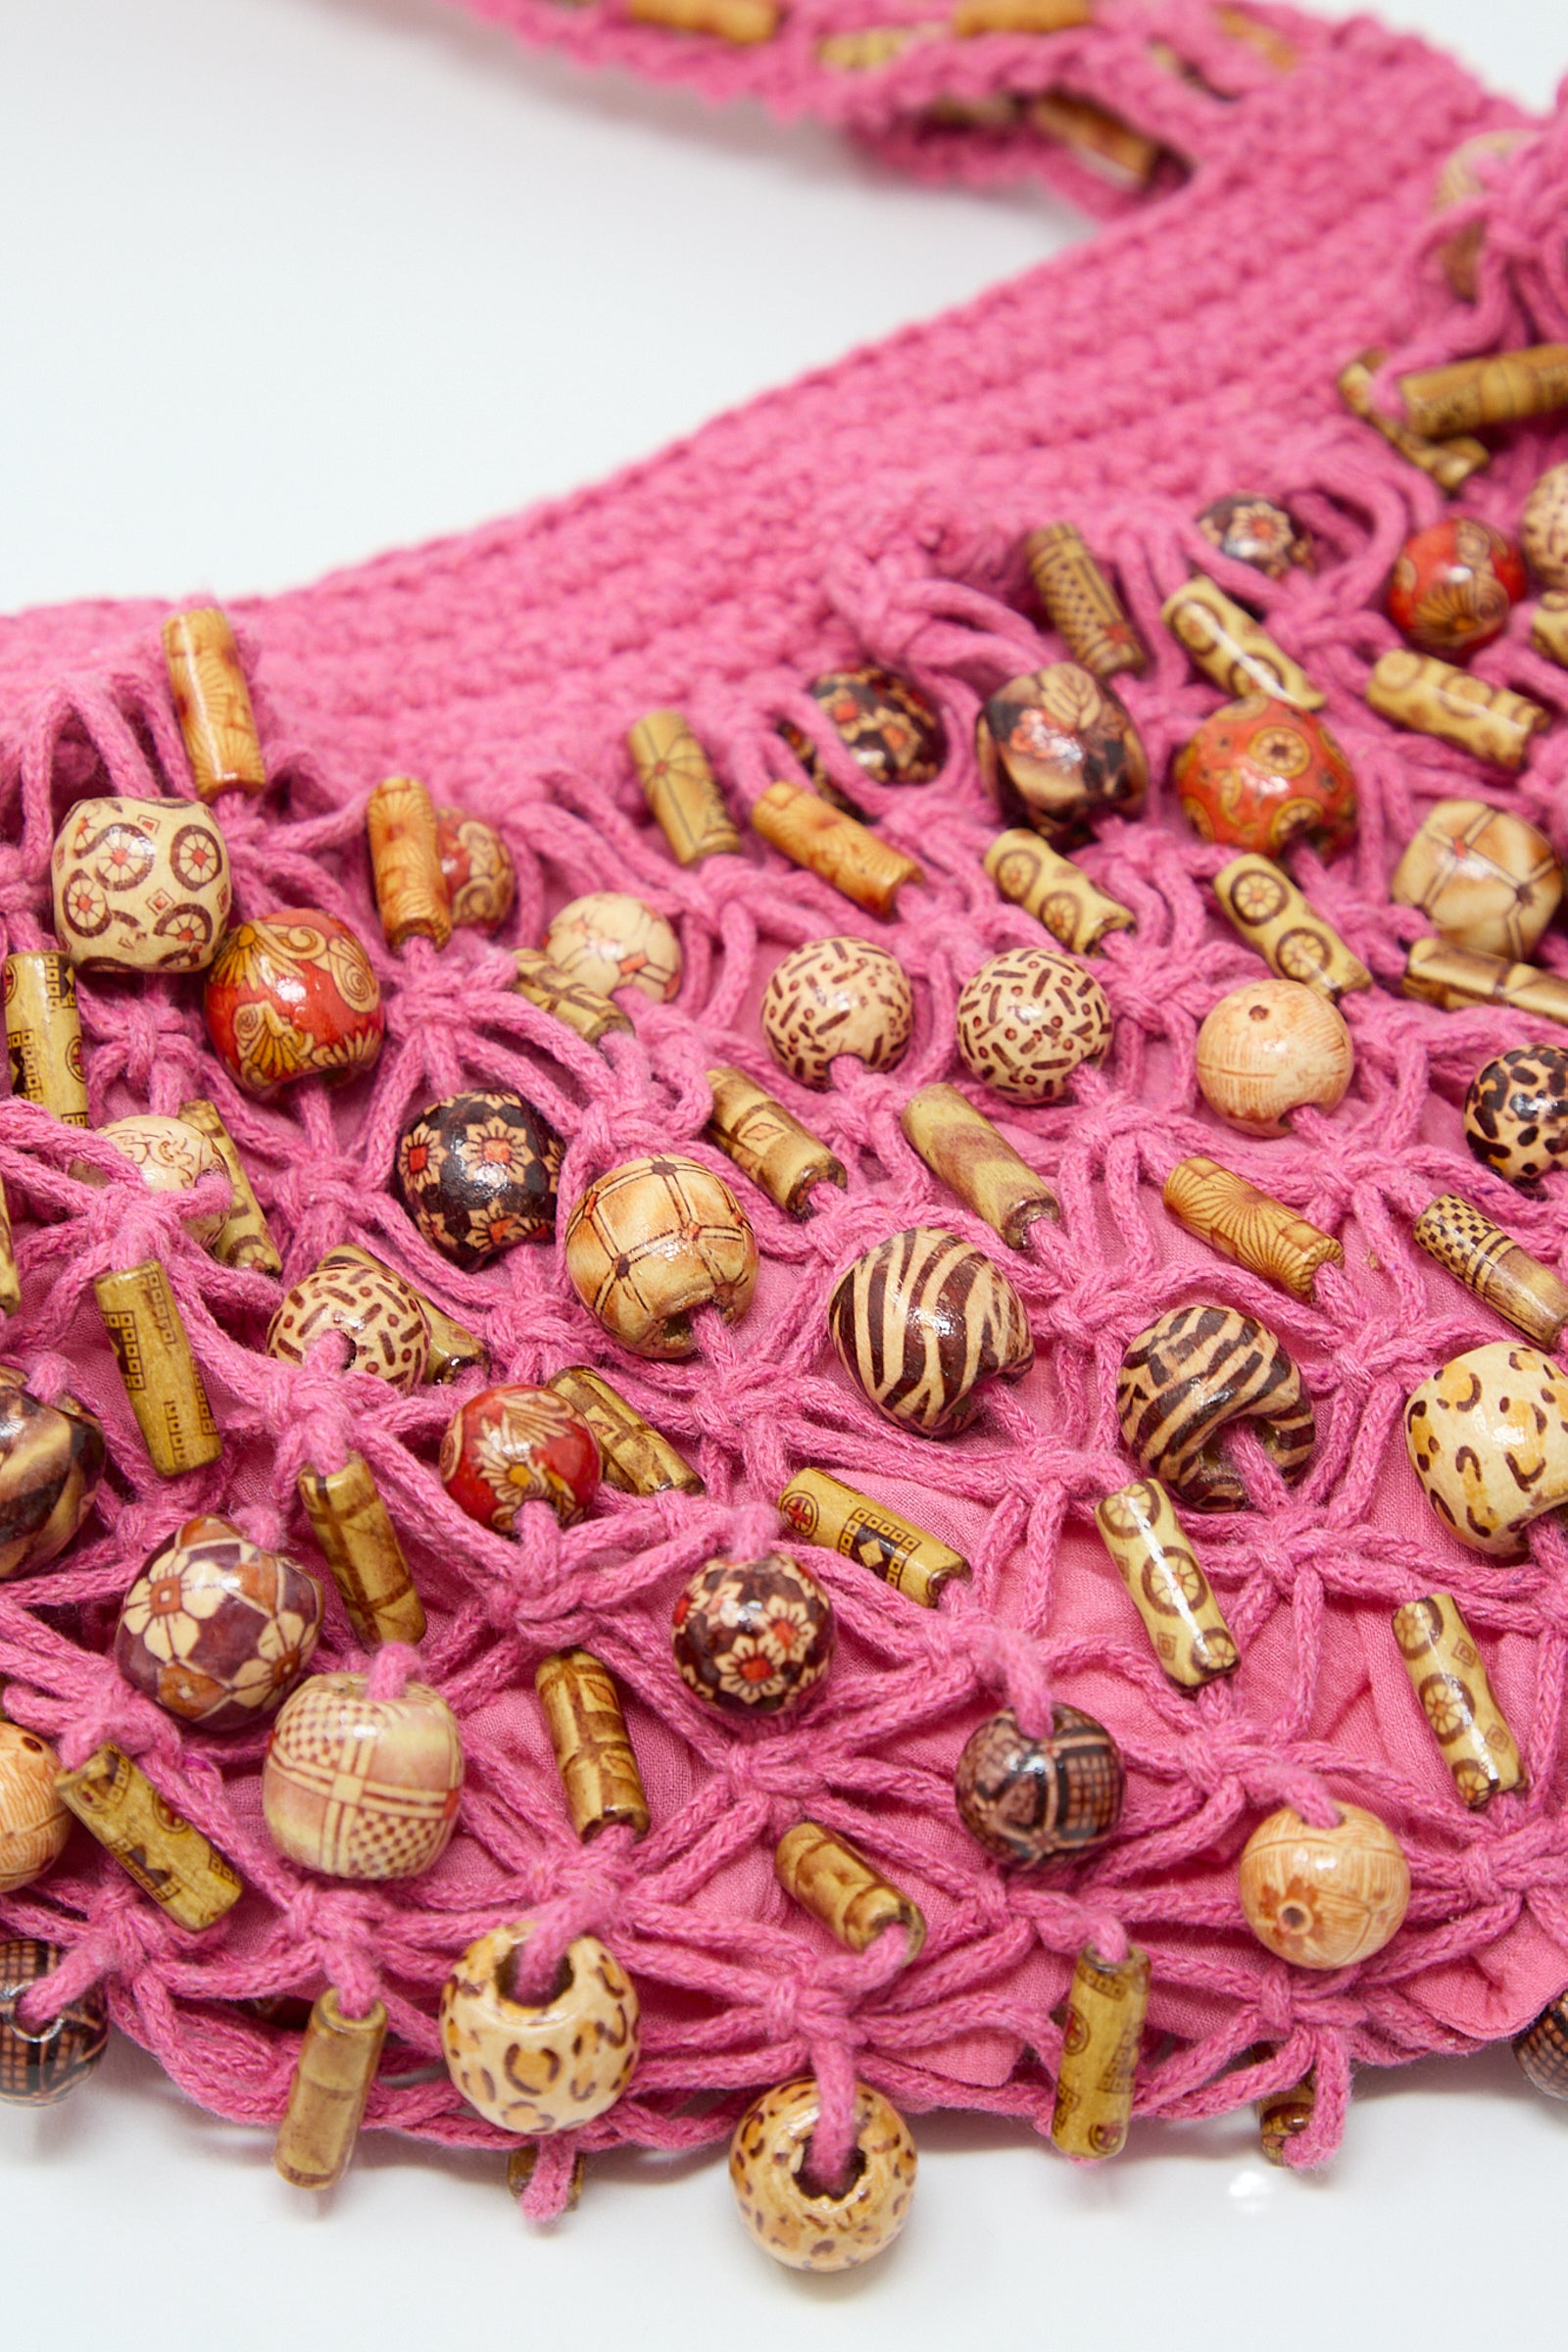 Close-up of a pink crocheted Assorted Wooden Beads Macrame Hammock Bucket Bag in Fushcia with decorative wooden beads and spools interwoven by Luna Del Pinal.